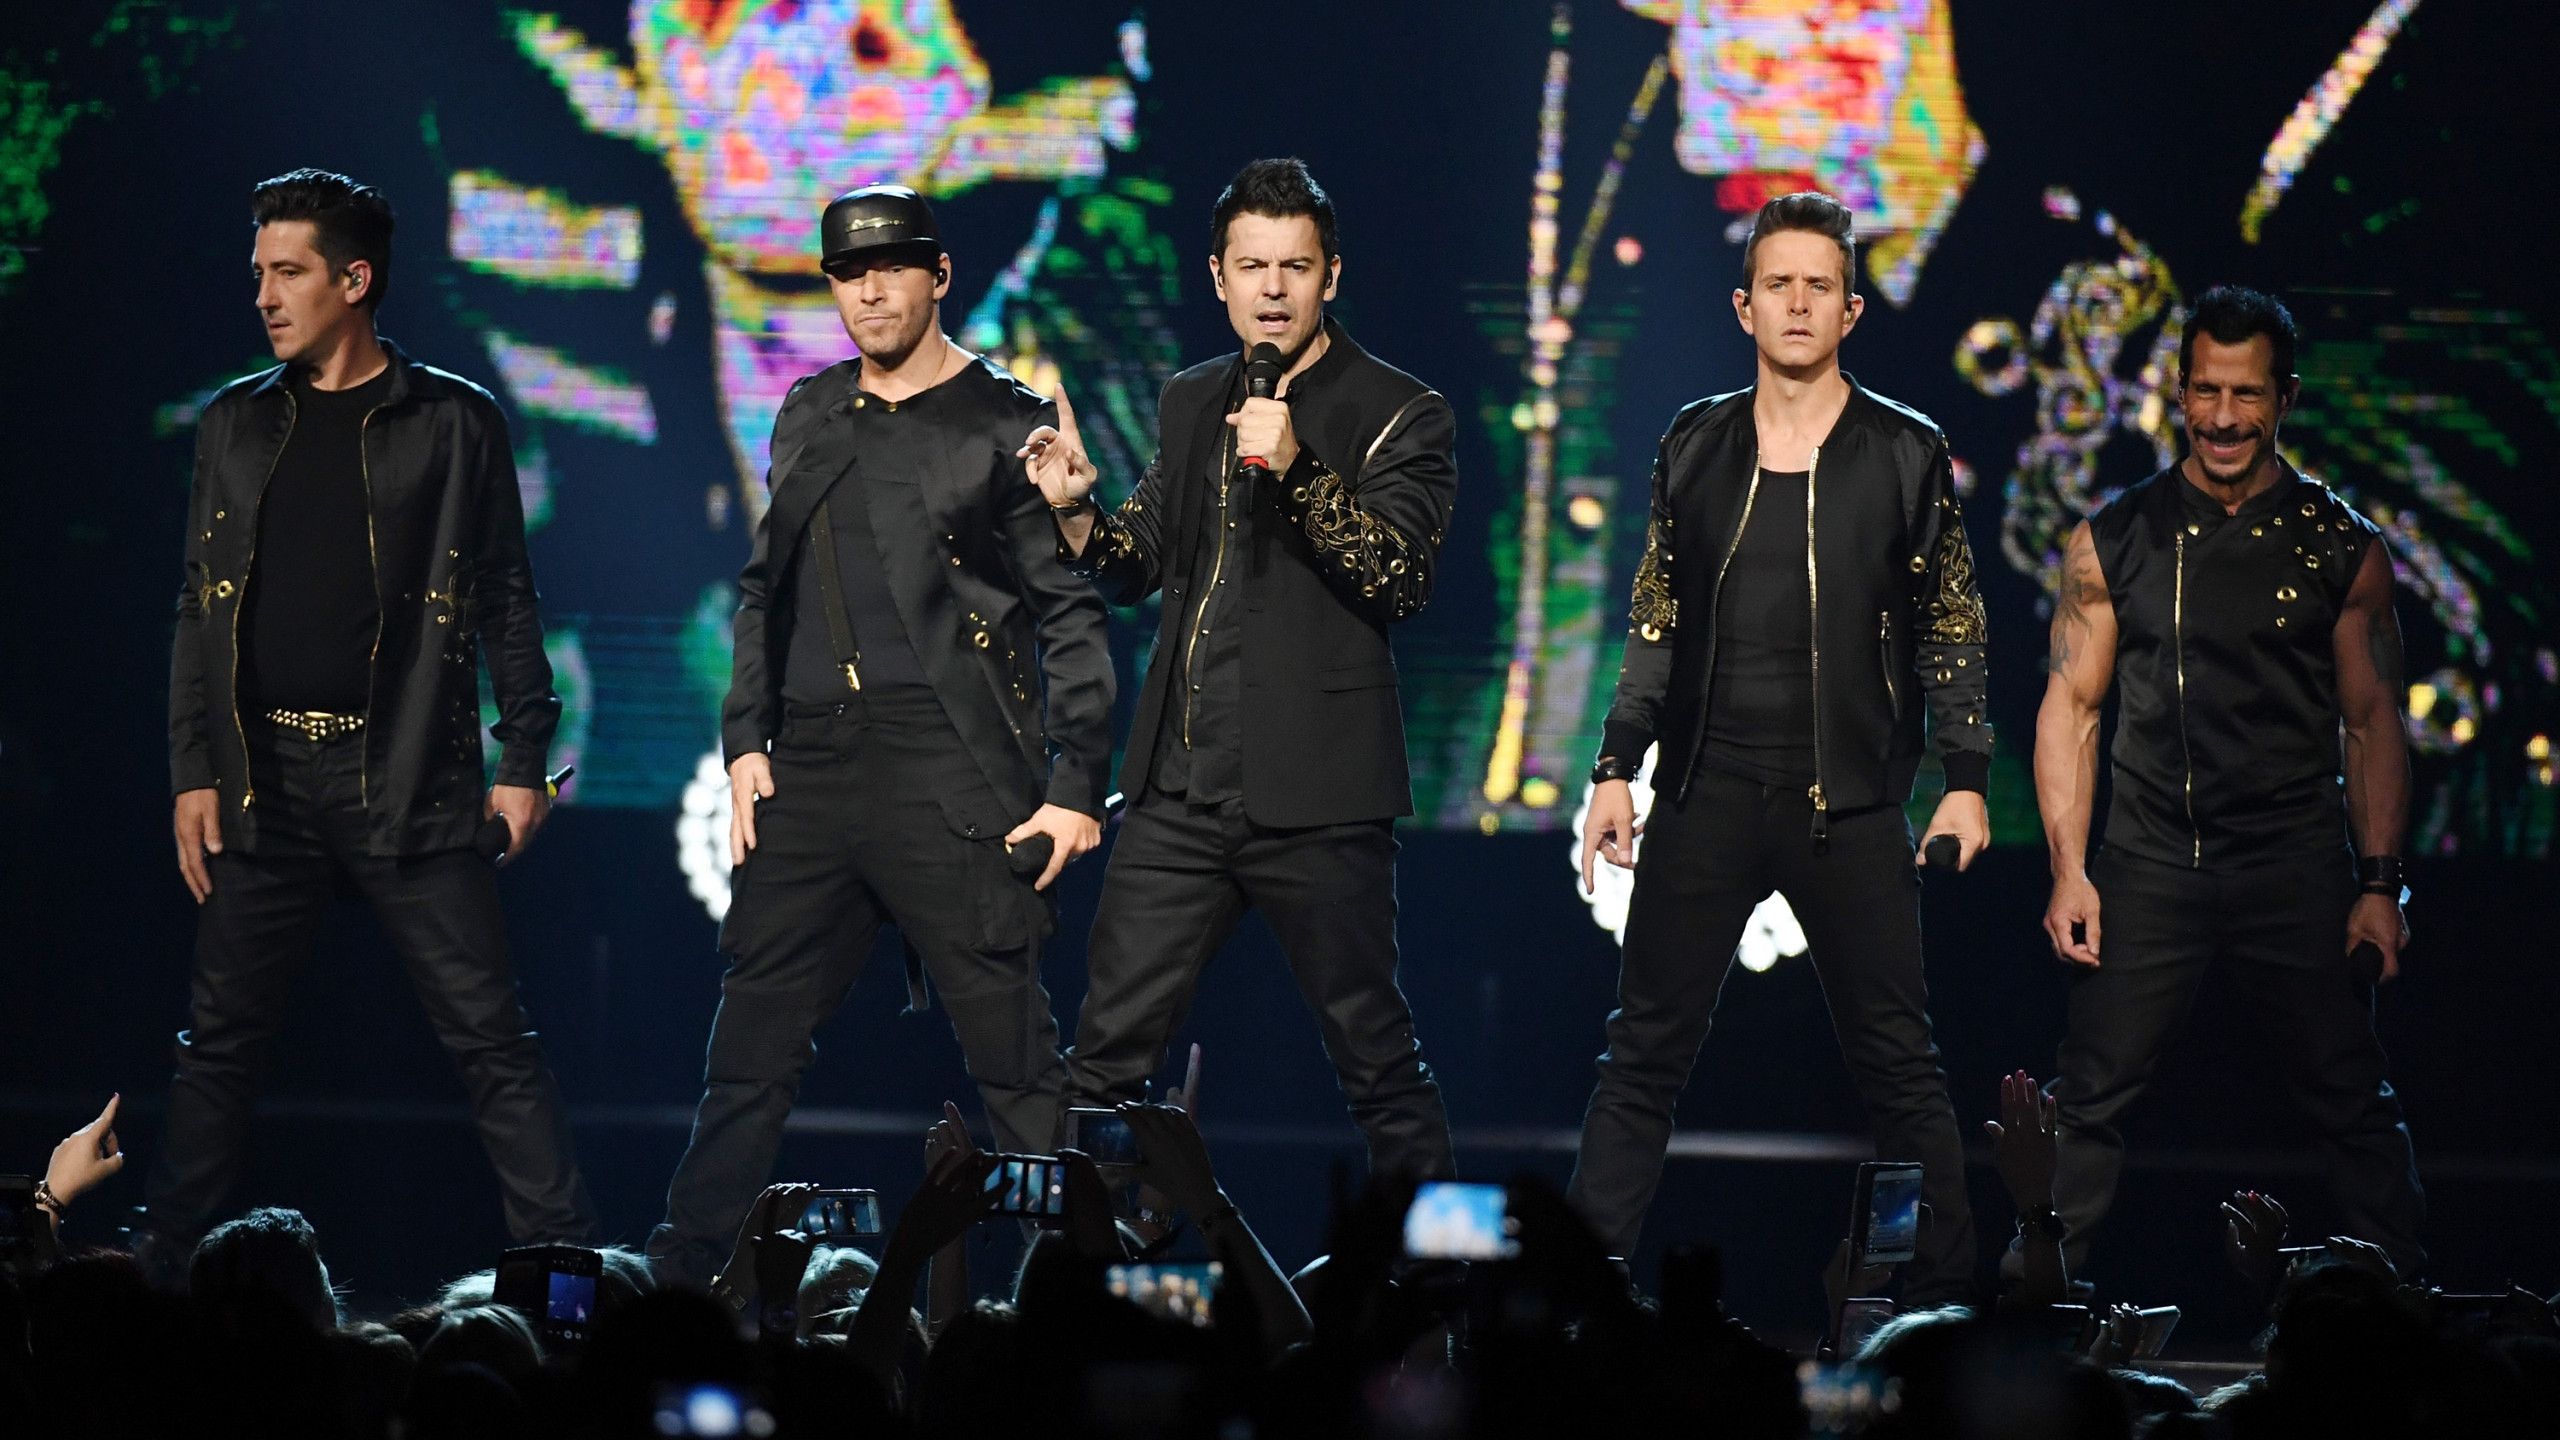 New Kids on the Block fans, listen up: Here is how you can get